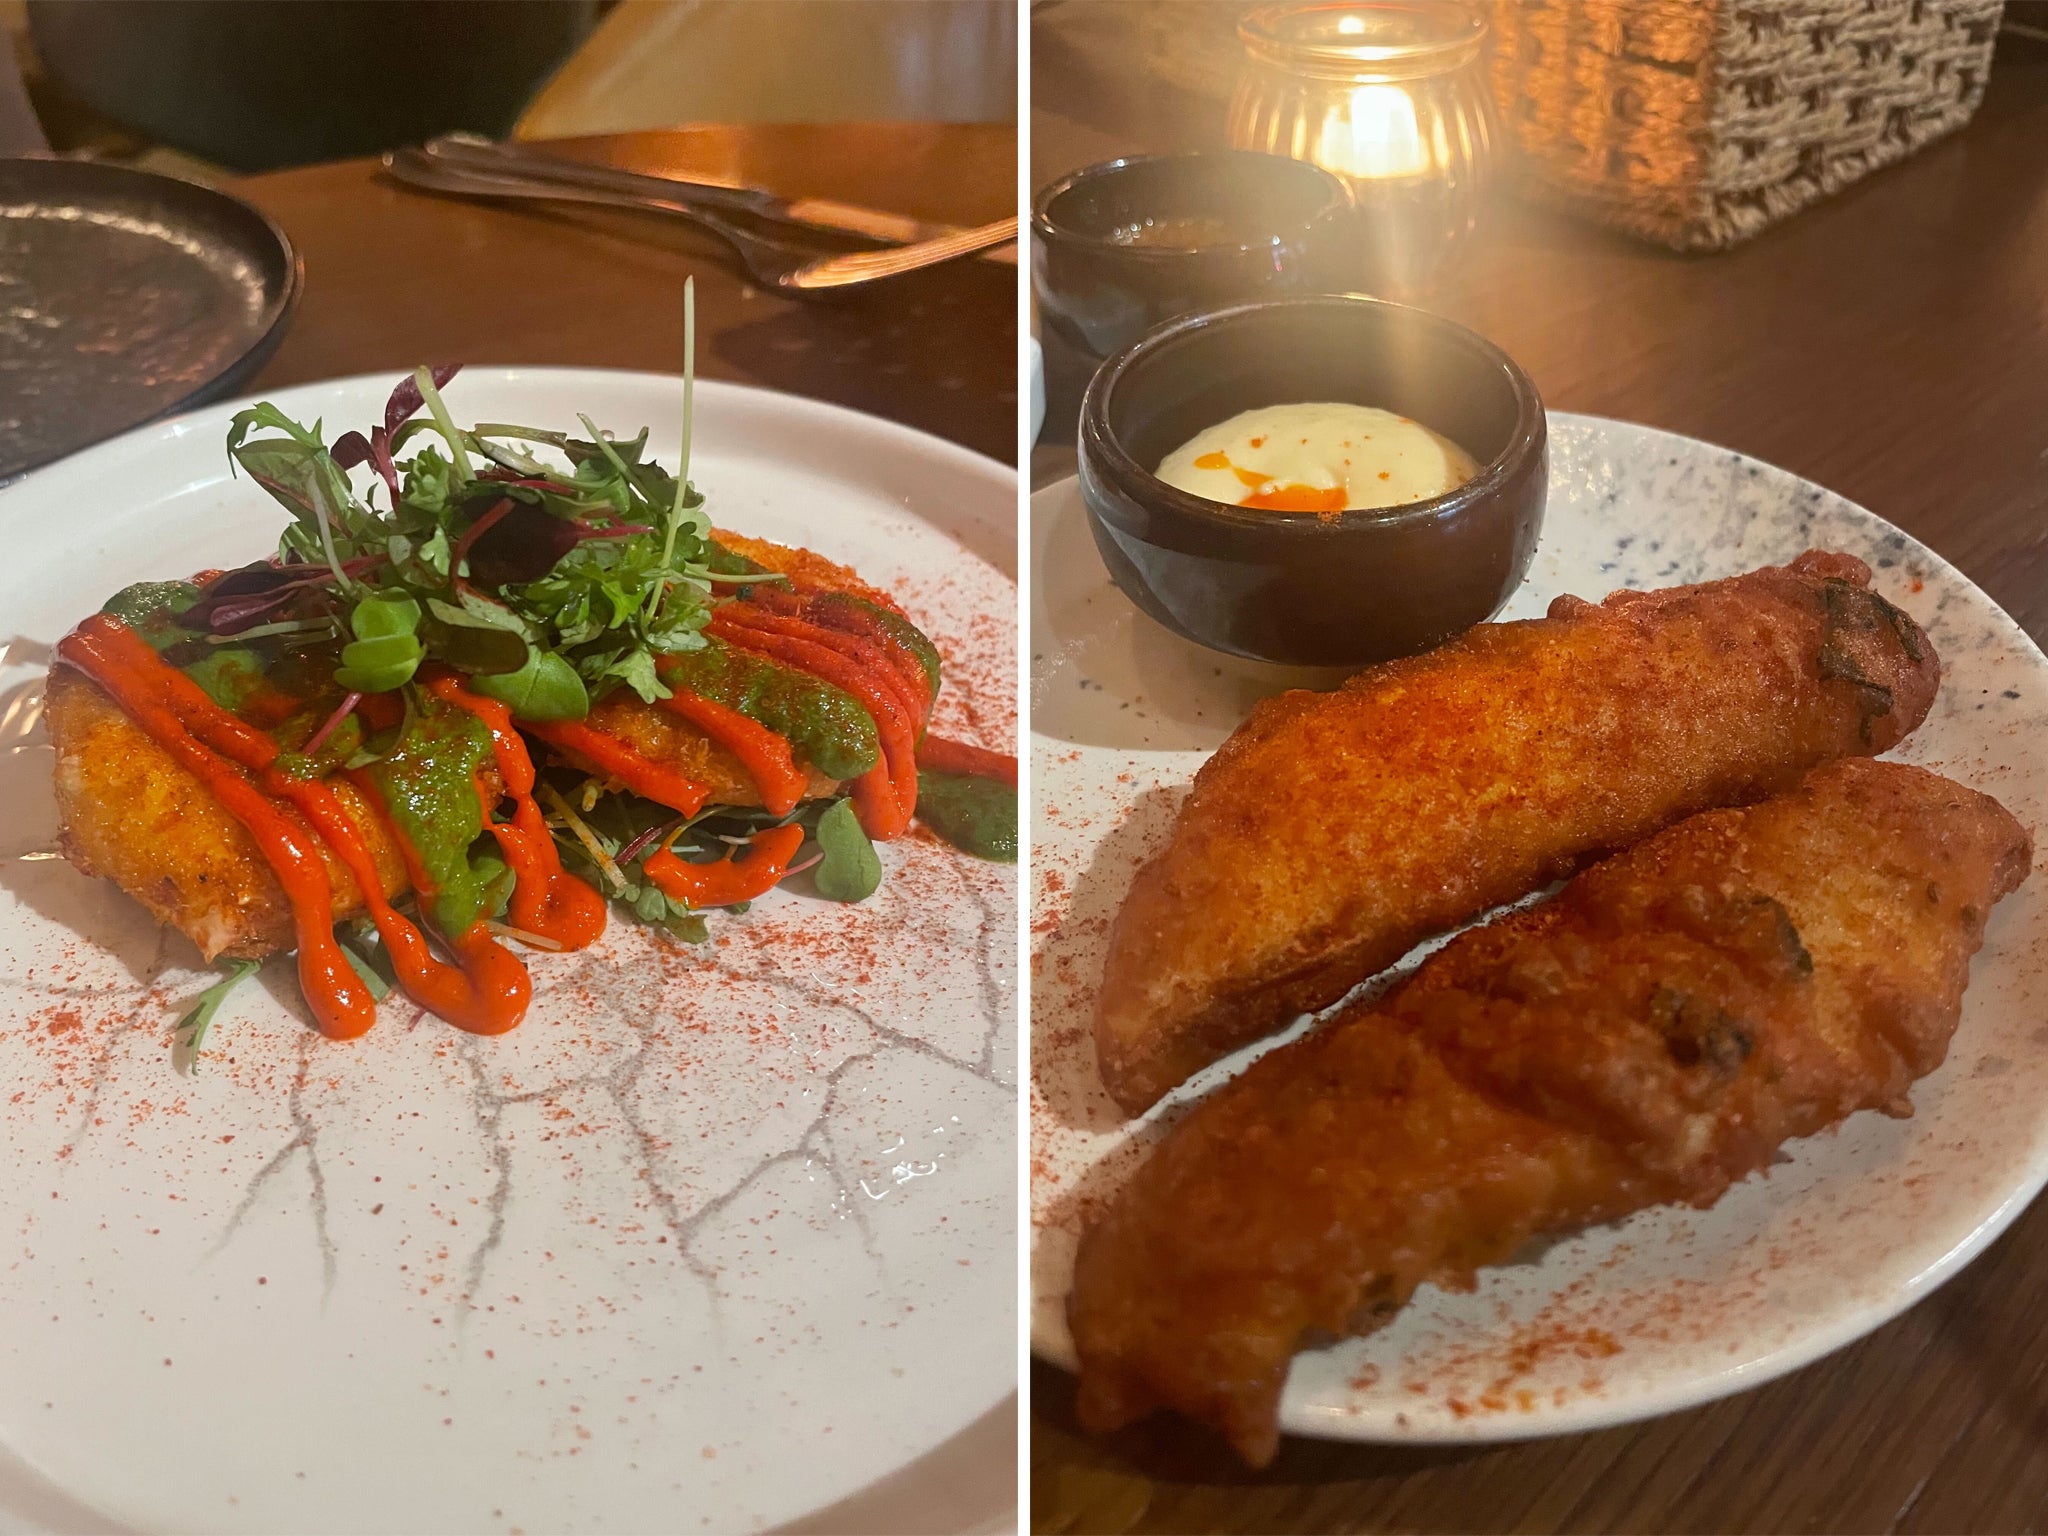 The £39pp set menu gets you four starters to share